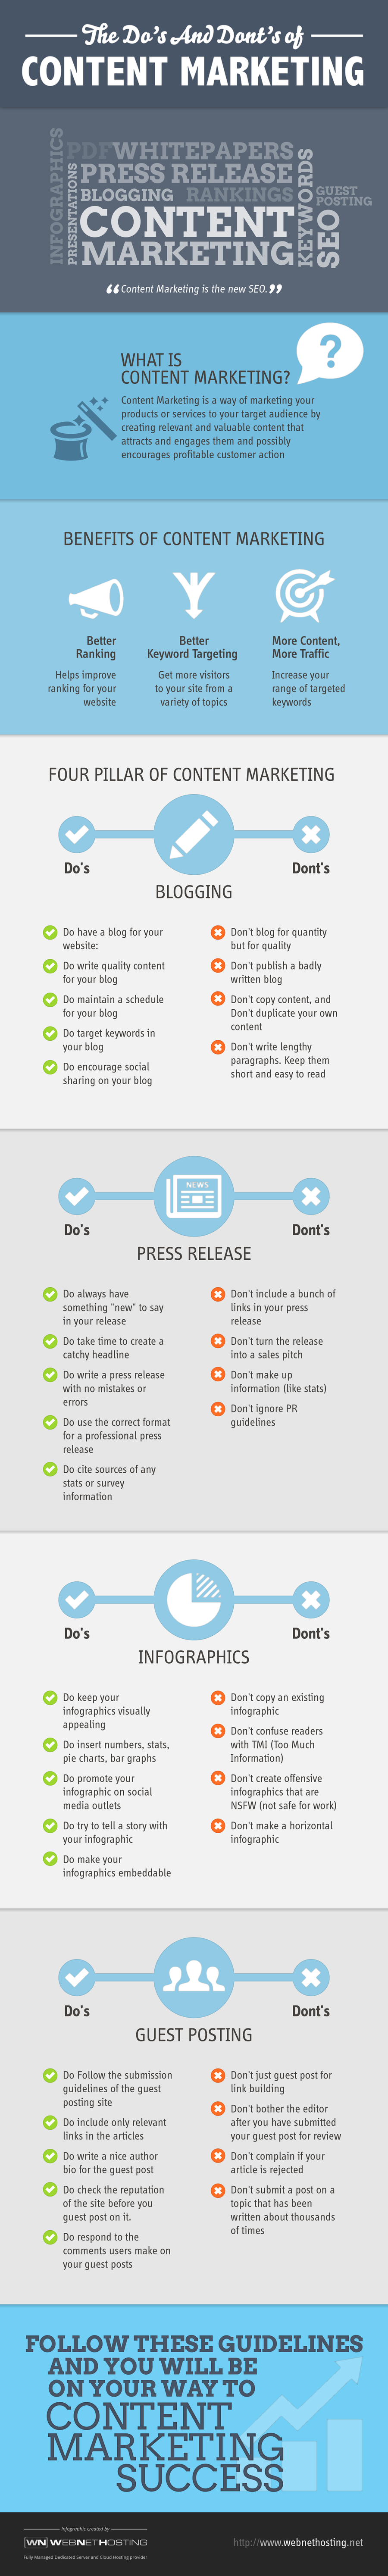 The Do’s and Dont’s of Content Marketing